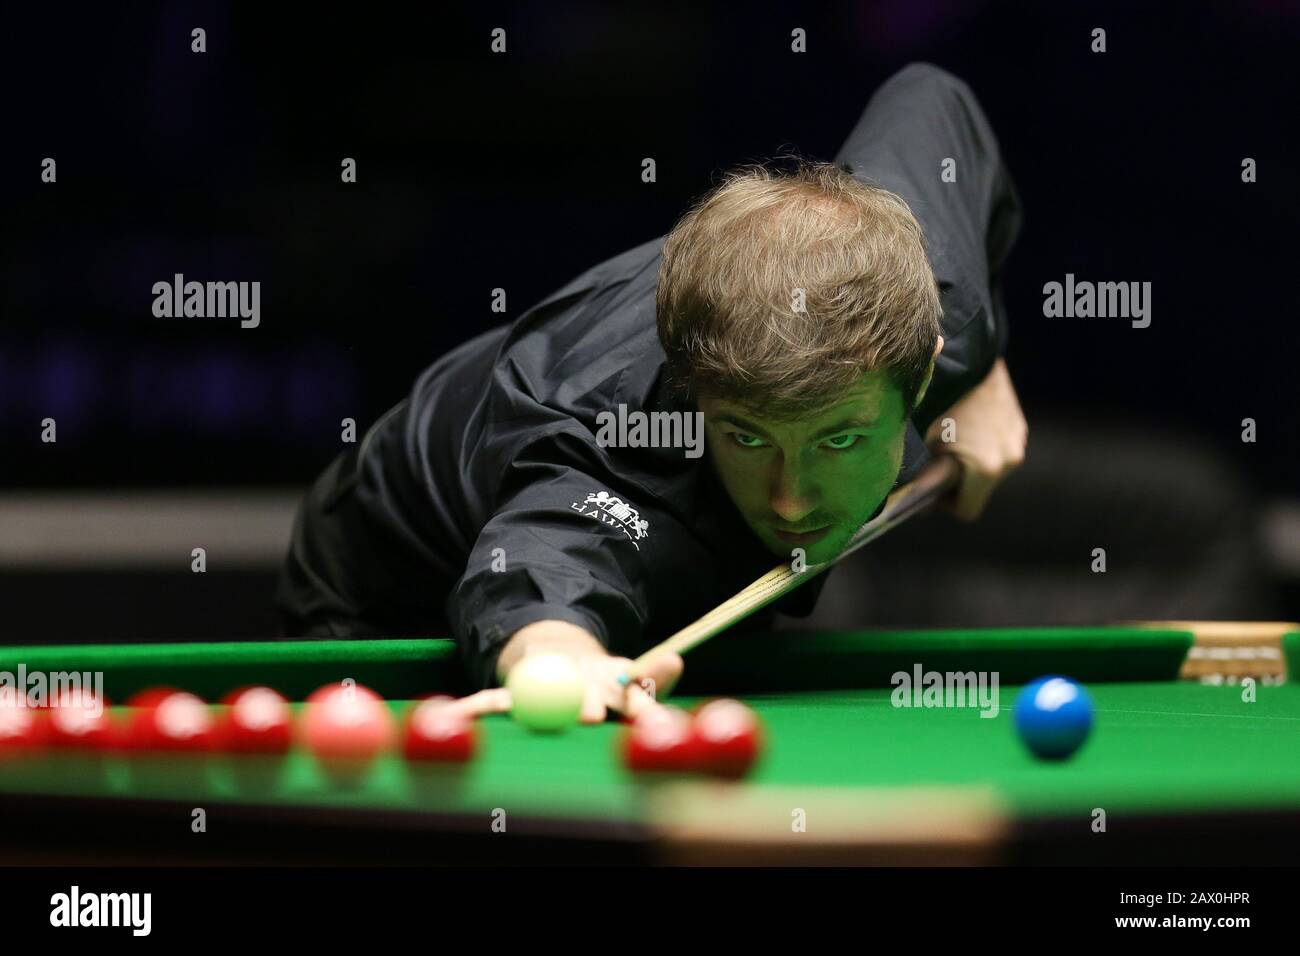 Cardiff, UK. 10th Feb, 2020. Jack Lisowski of England during his 1st round  match against Li Hang of China. ManBet X Welsh Open snooker 2020, day 1 at  the Motorpoint Arena in